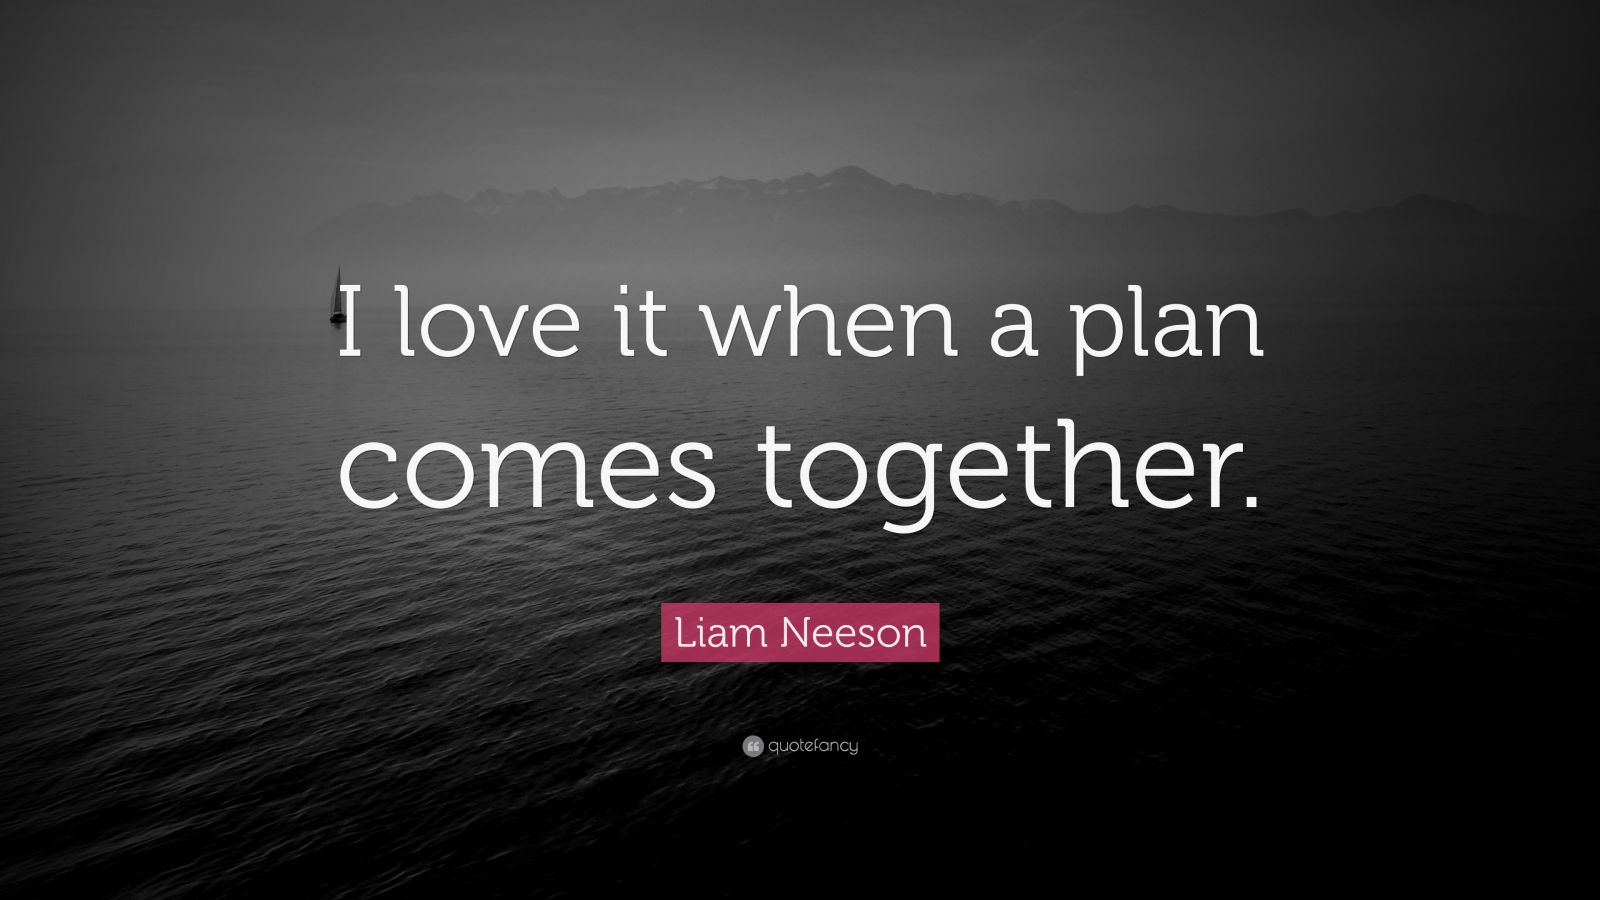 Liam Neeson Quote: “I love it when a plan comes together.” (12